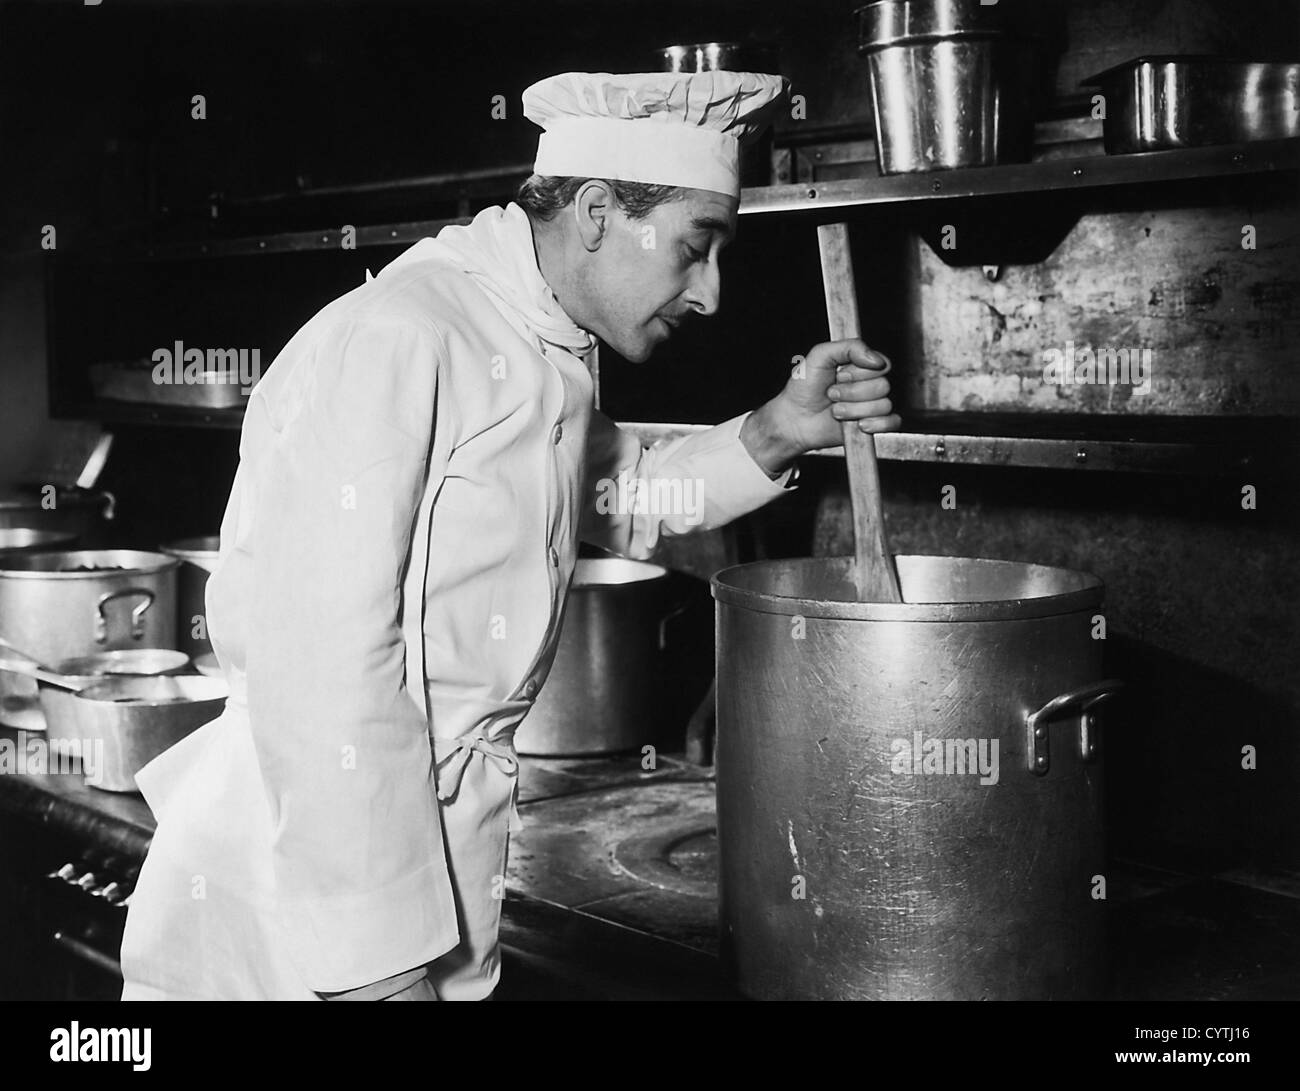 Chef stirring soup in large pot on stove Stock Photo